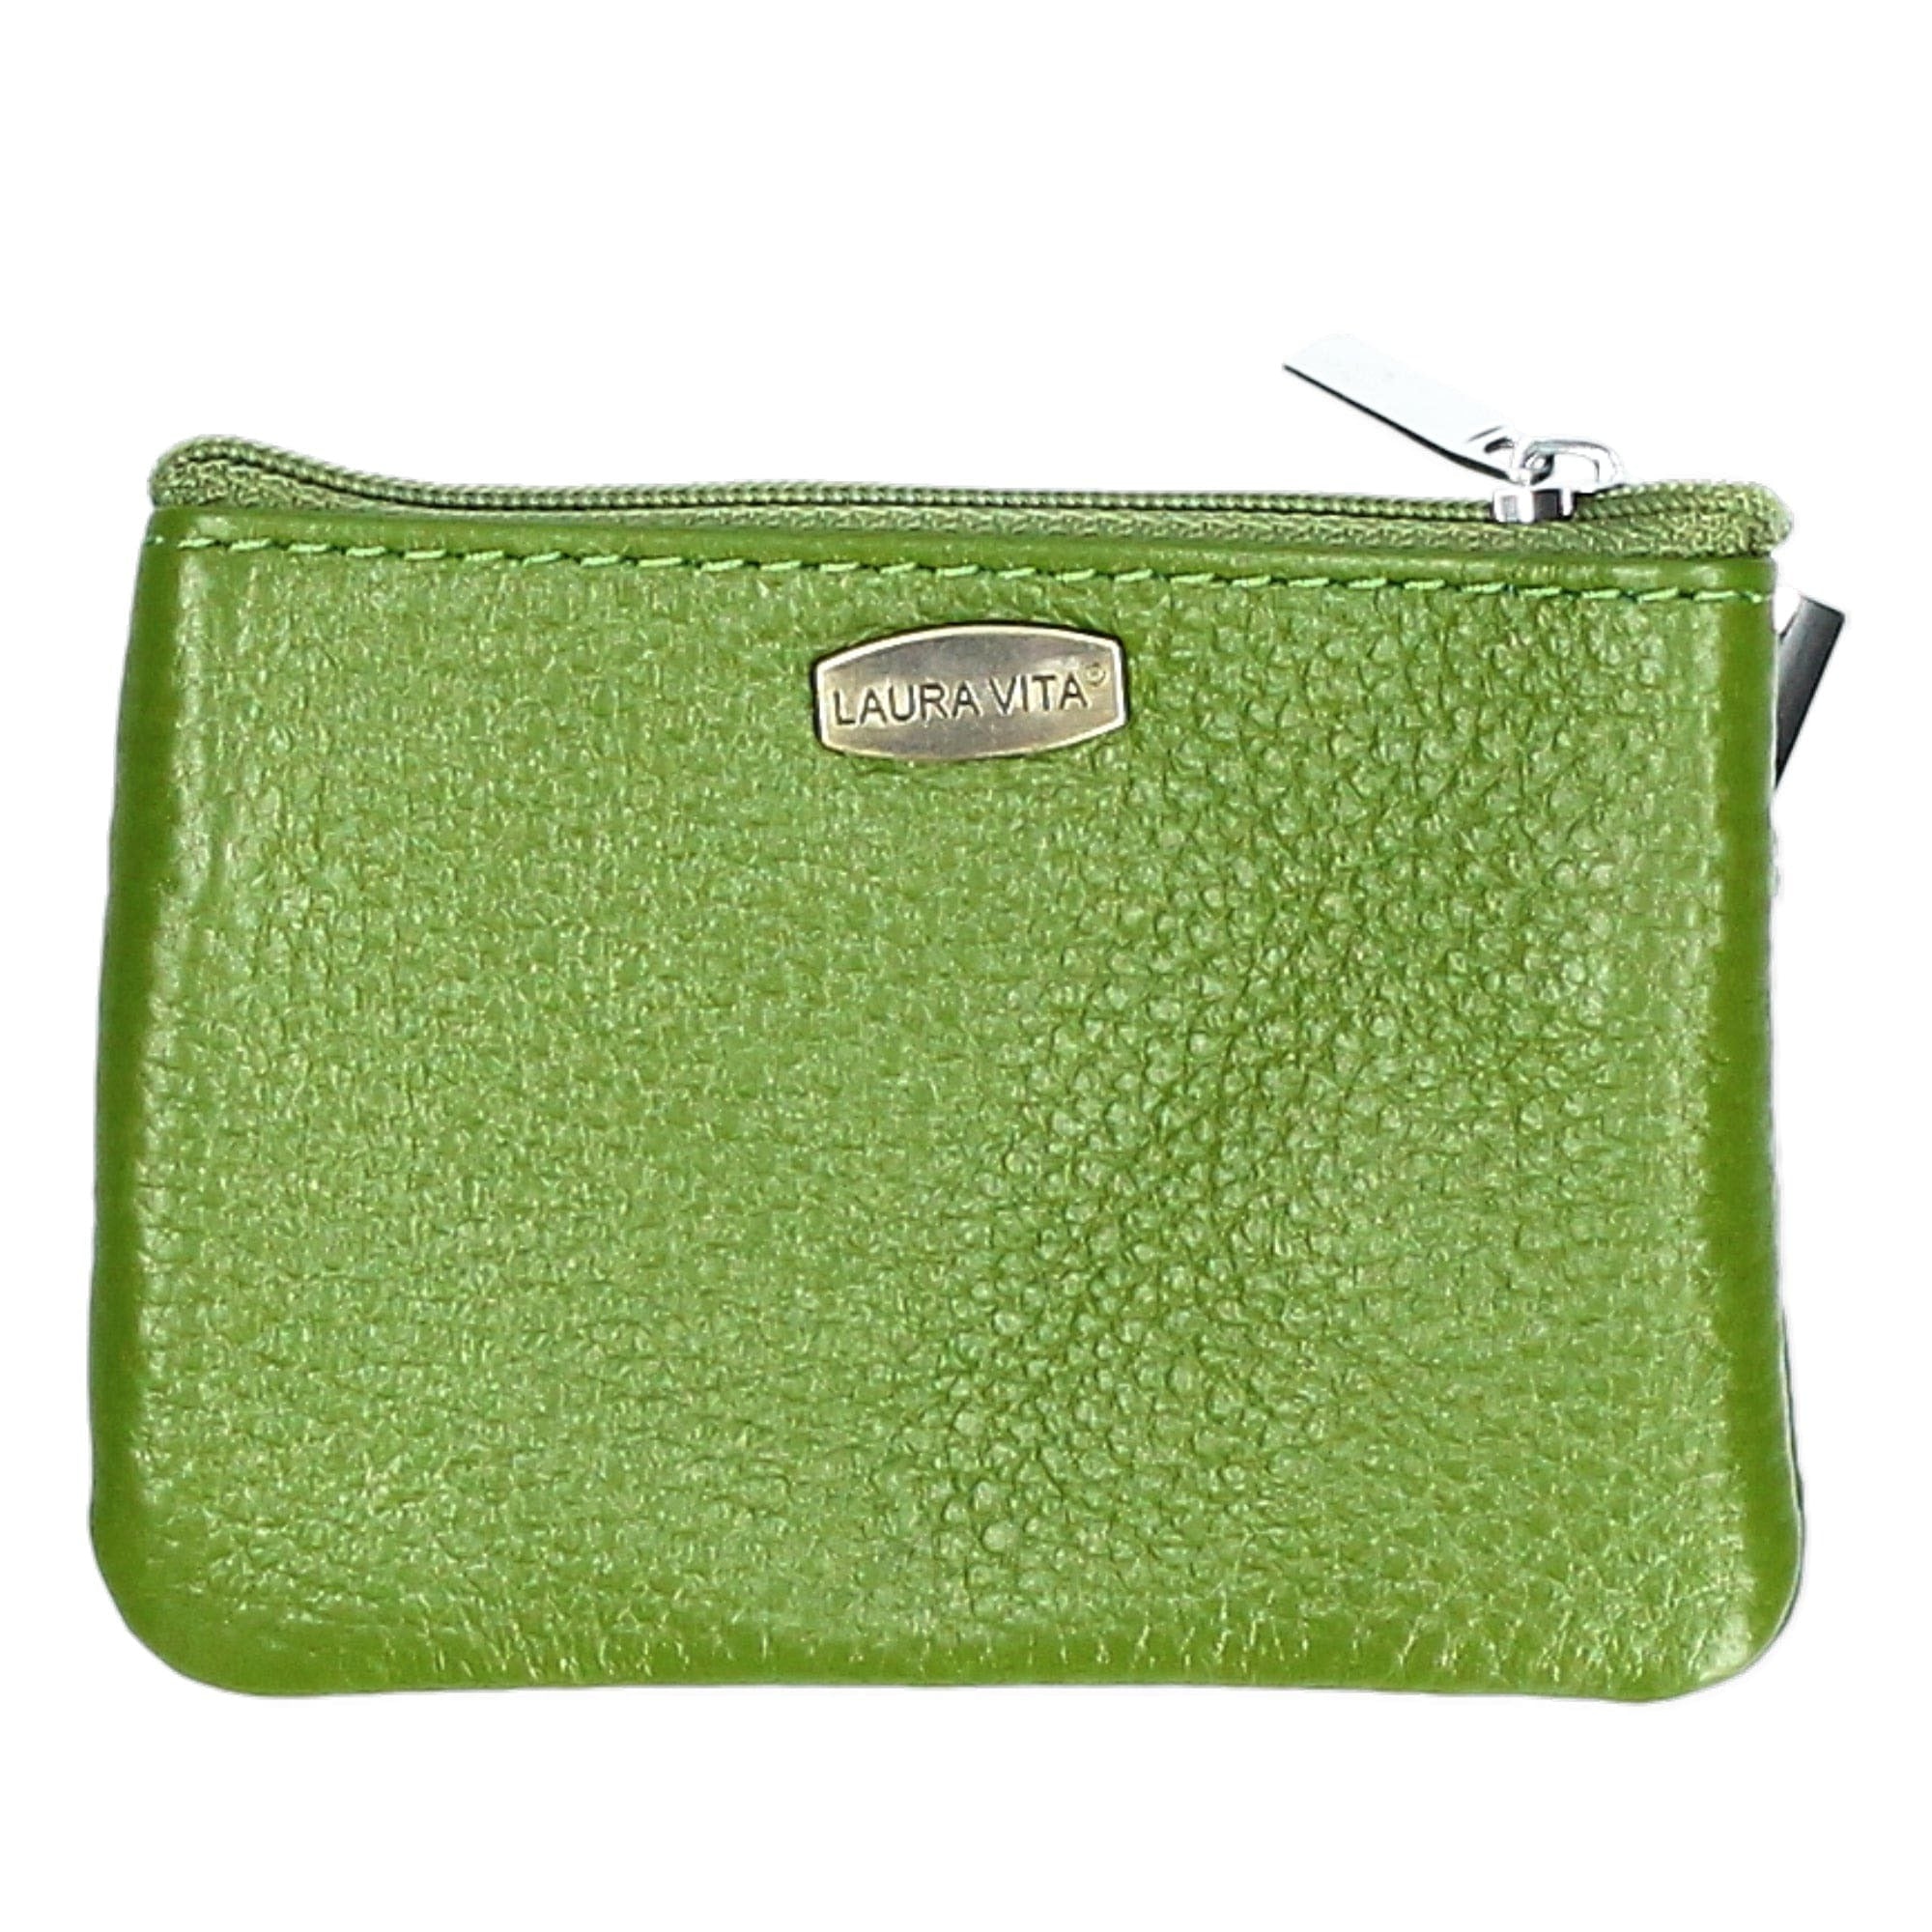 Miro wallet - Green - Small leather goods